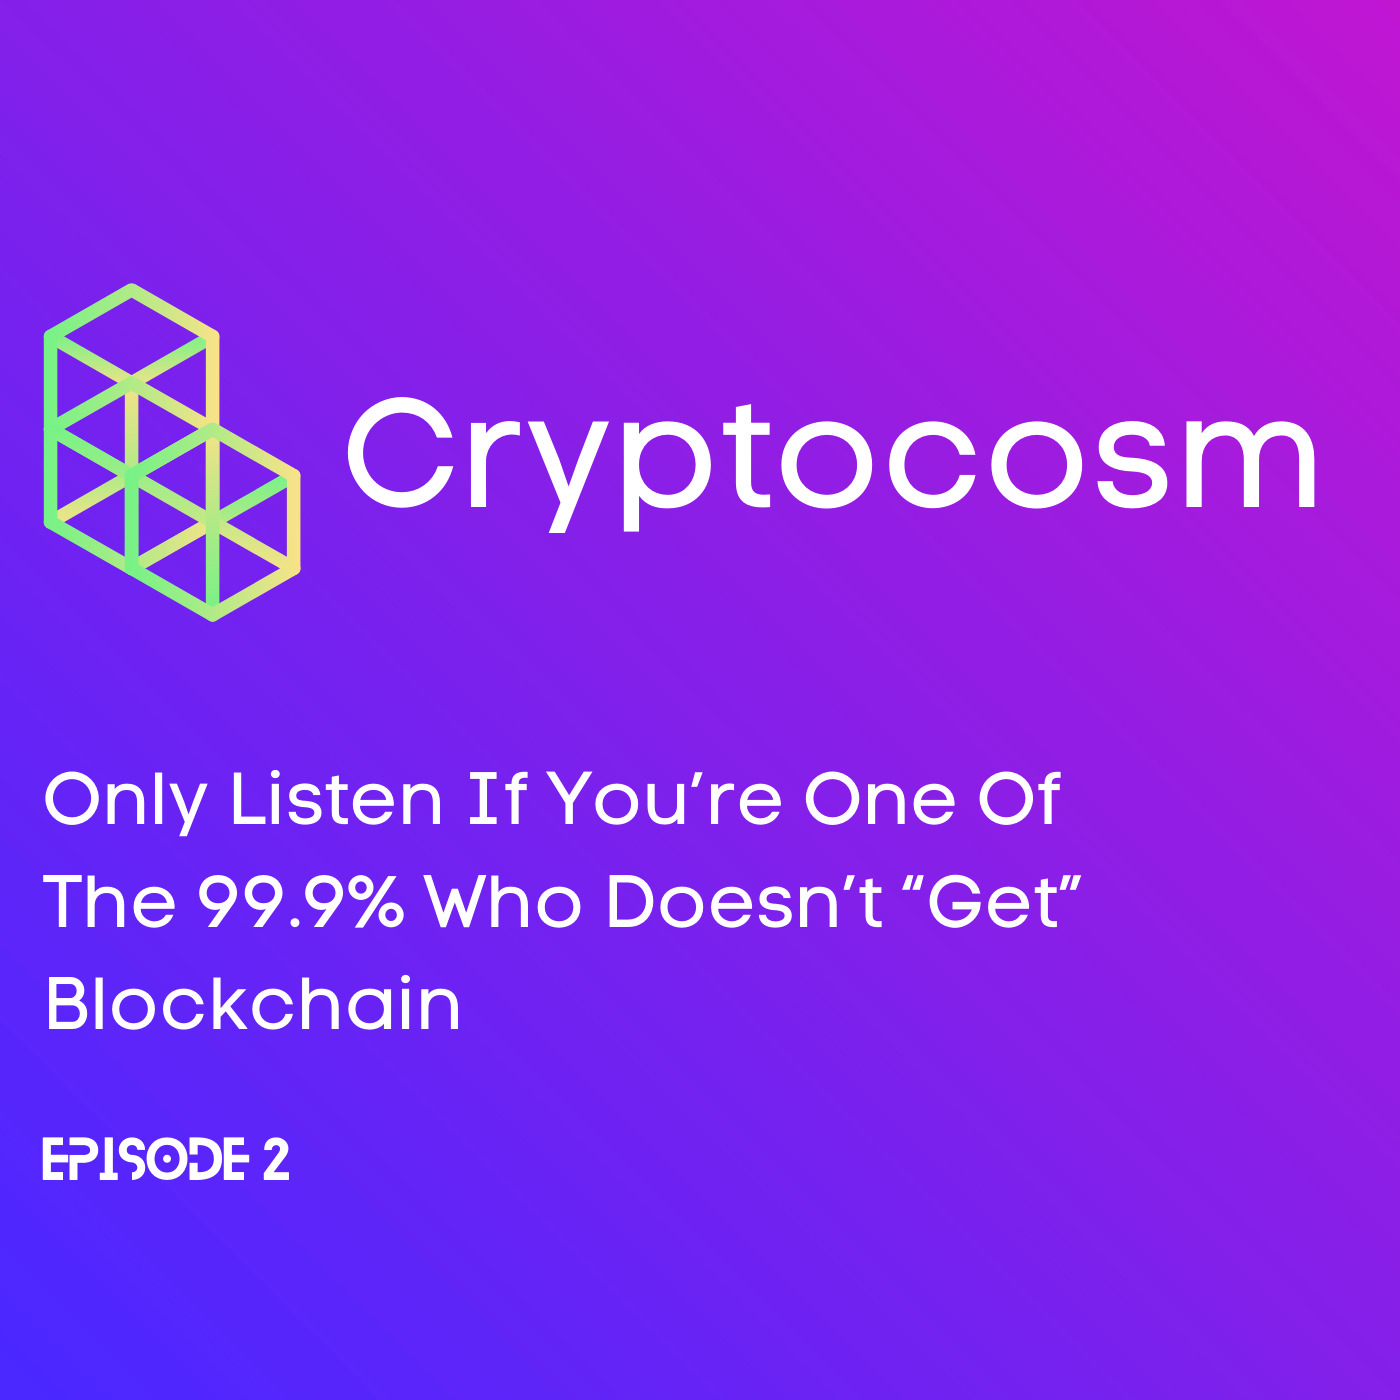 Only Listen If You’re One Of The 99.9% Who Doesn’t “Get” Blockchain